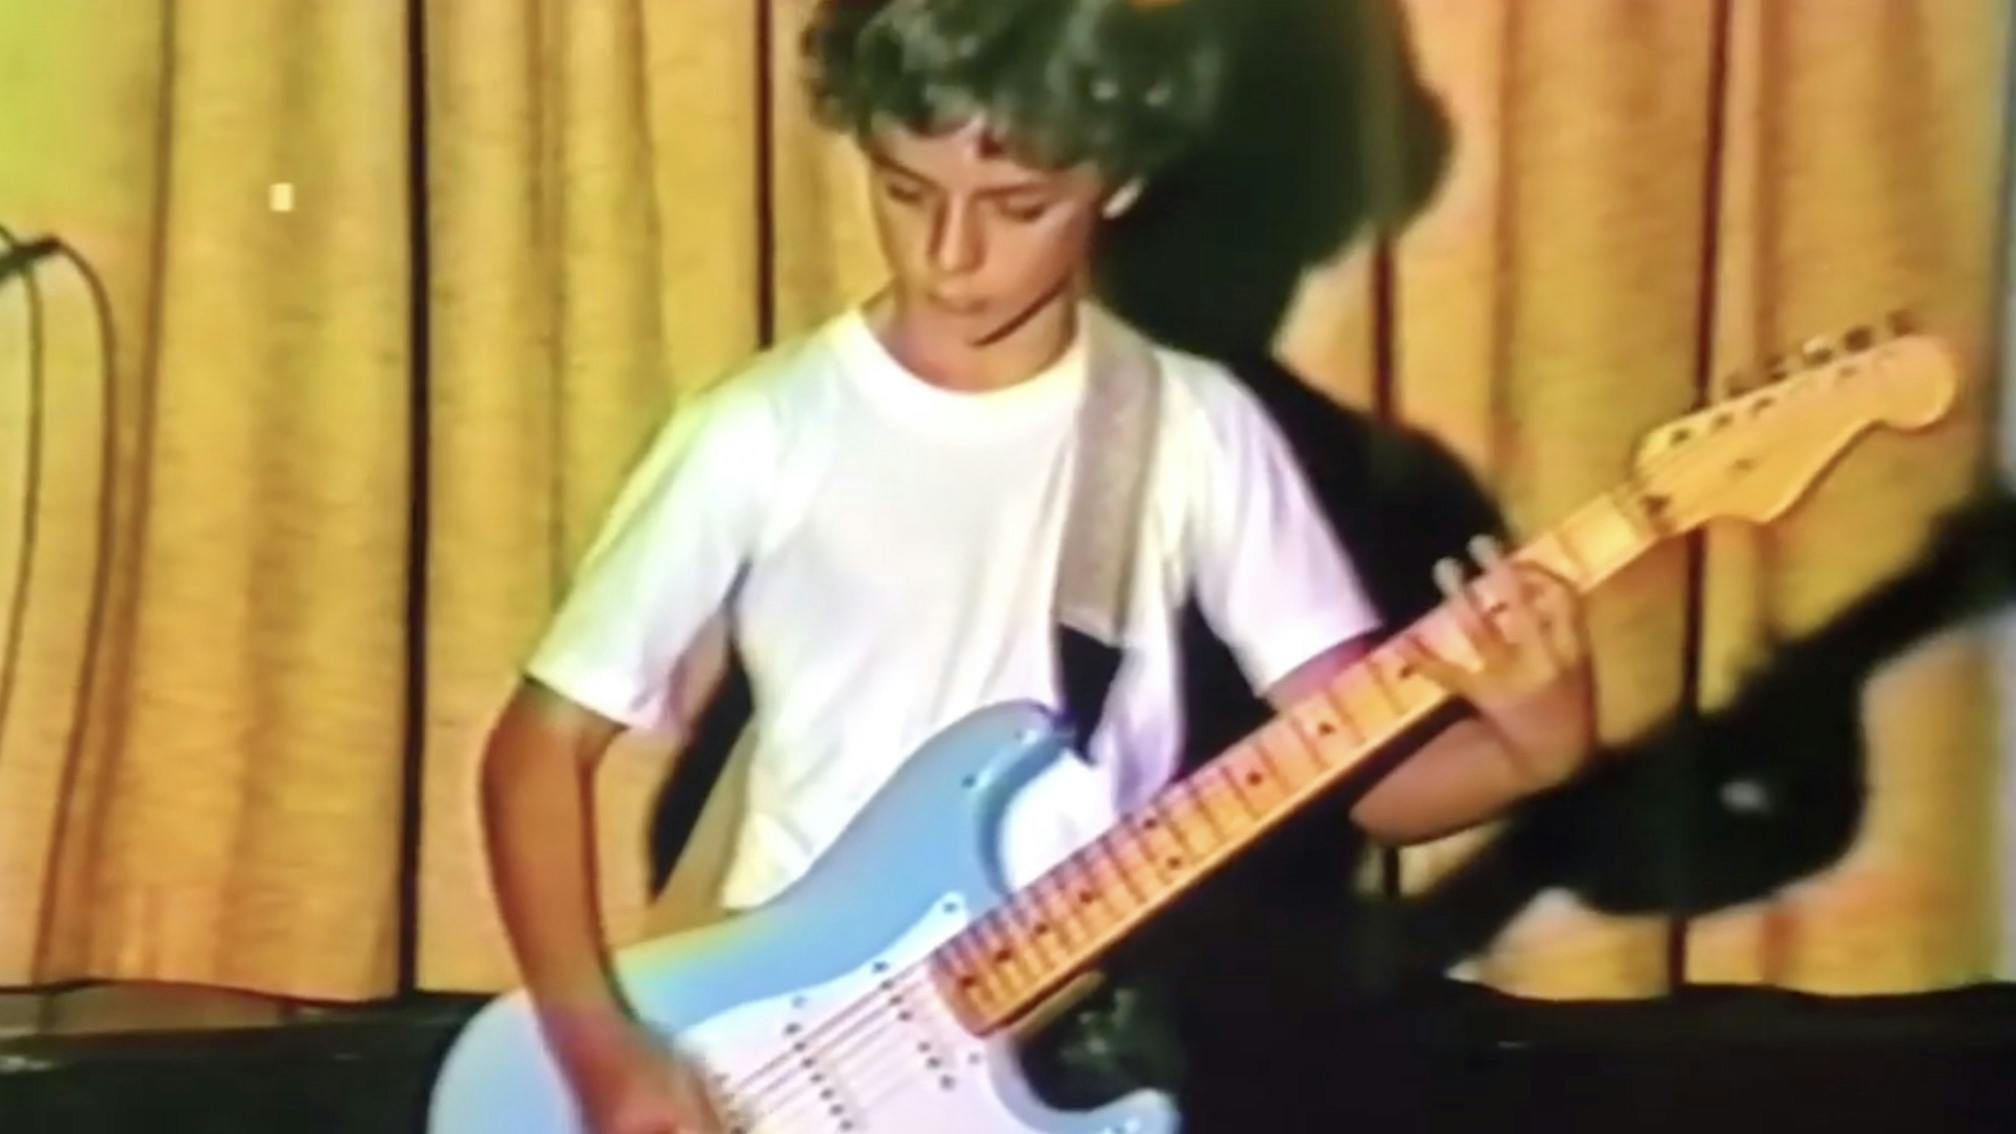 Watch A Young Billie Joe Armstrong Performing Live With His Family